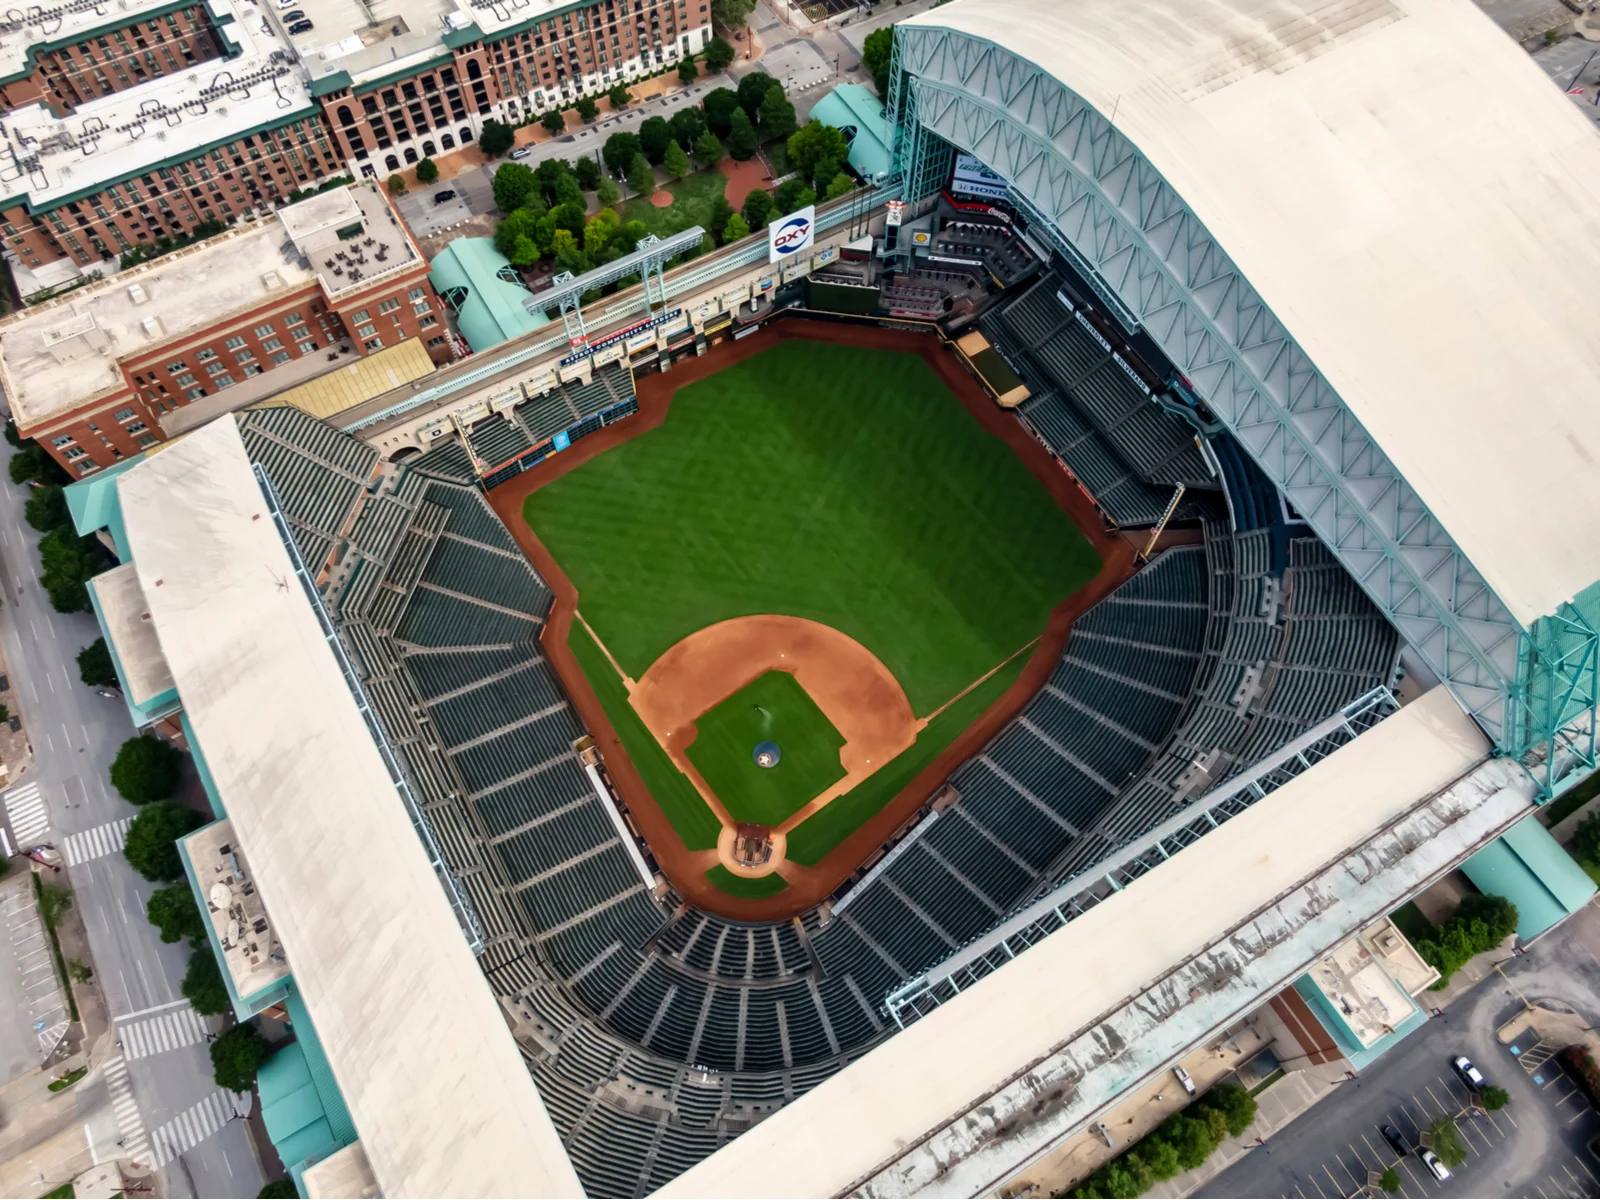 minute maid park, one of the best things to do in Houston, as viewed from above